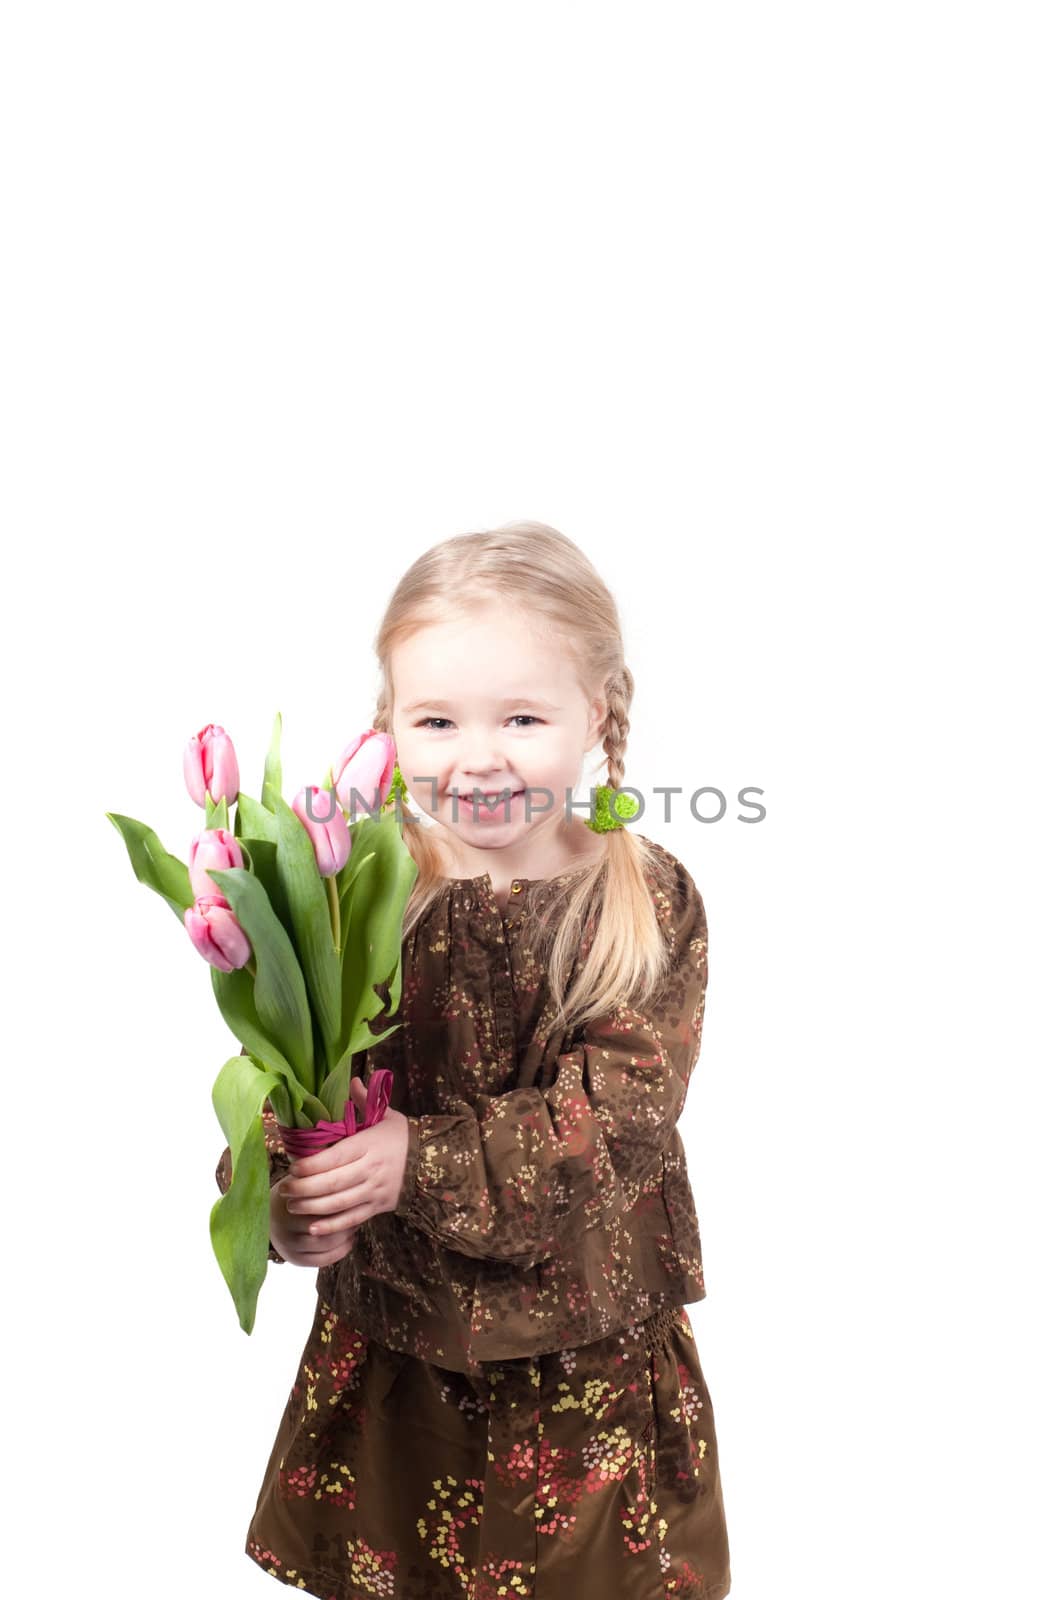 Little girl with flowers by anytka